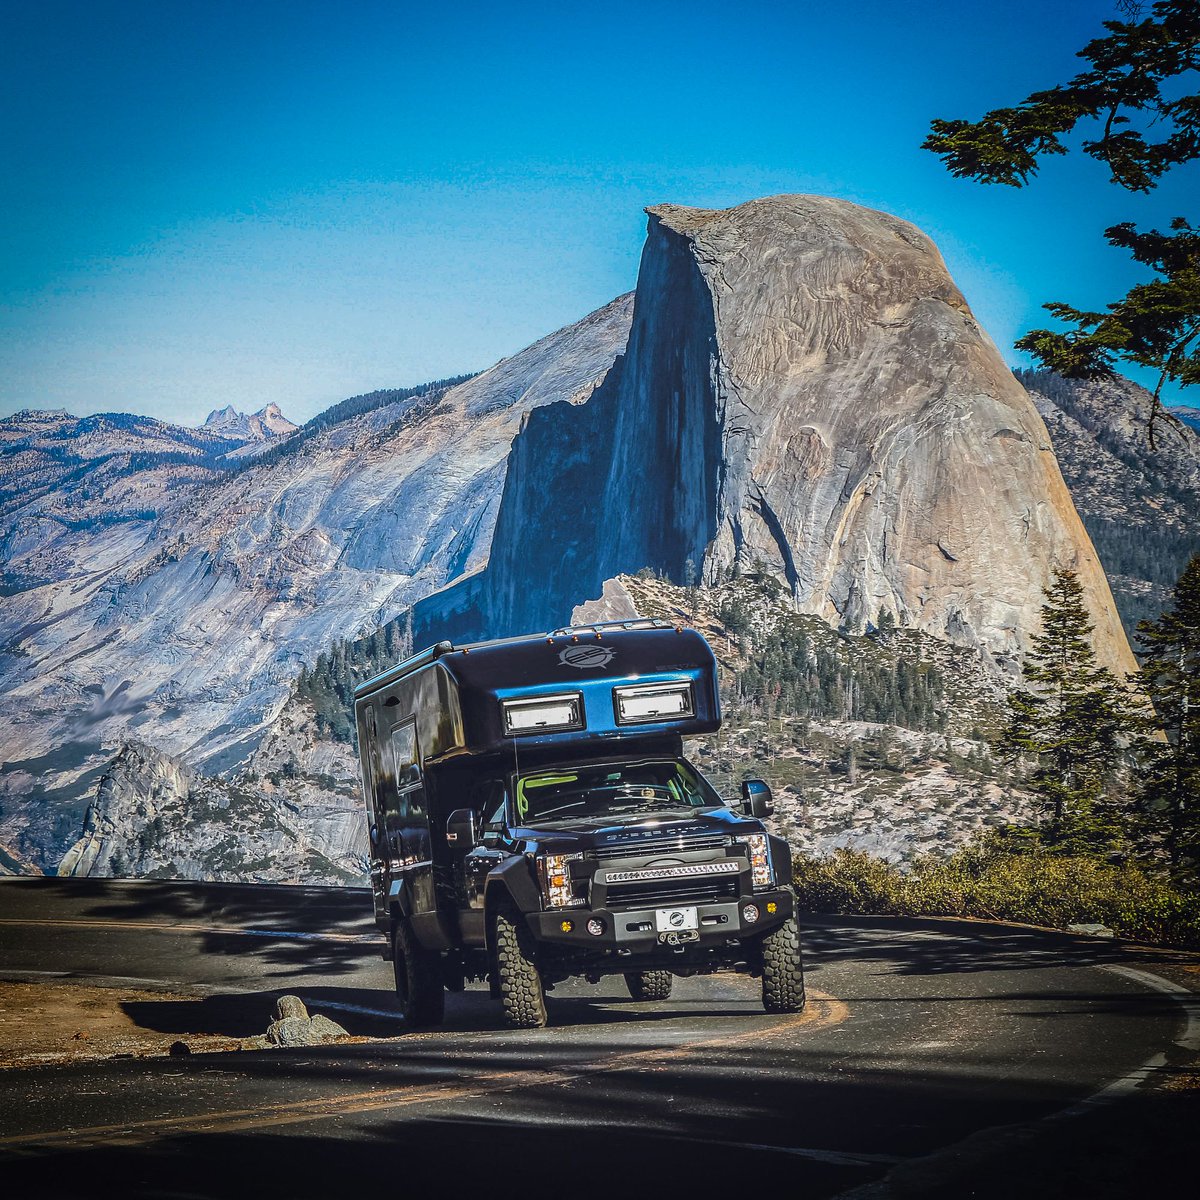 Warmer weather is near! Who's excited for summer camping trips? ☀️ · · · #earthroamer #offroad4x4 #expeditionvehicle #campinglife #overlanding #4x4life #4x4trucks #vanlife #vanlifeadventures #rvlife #luxuryvehicles